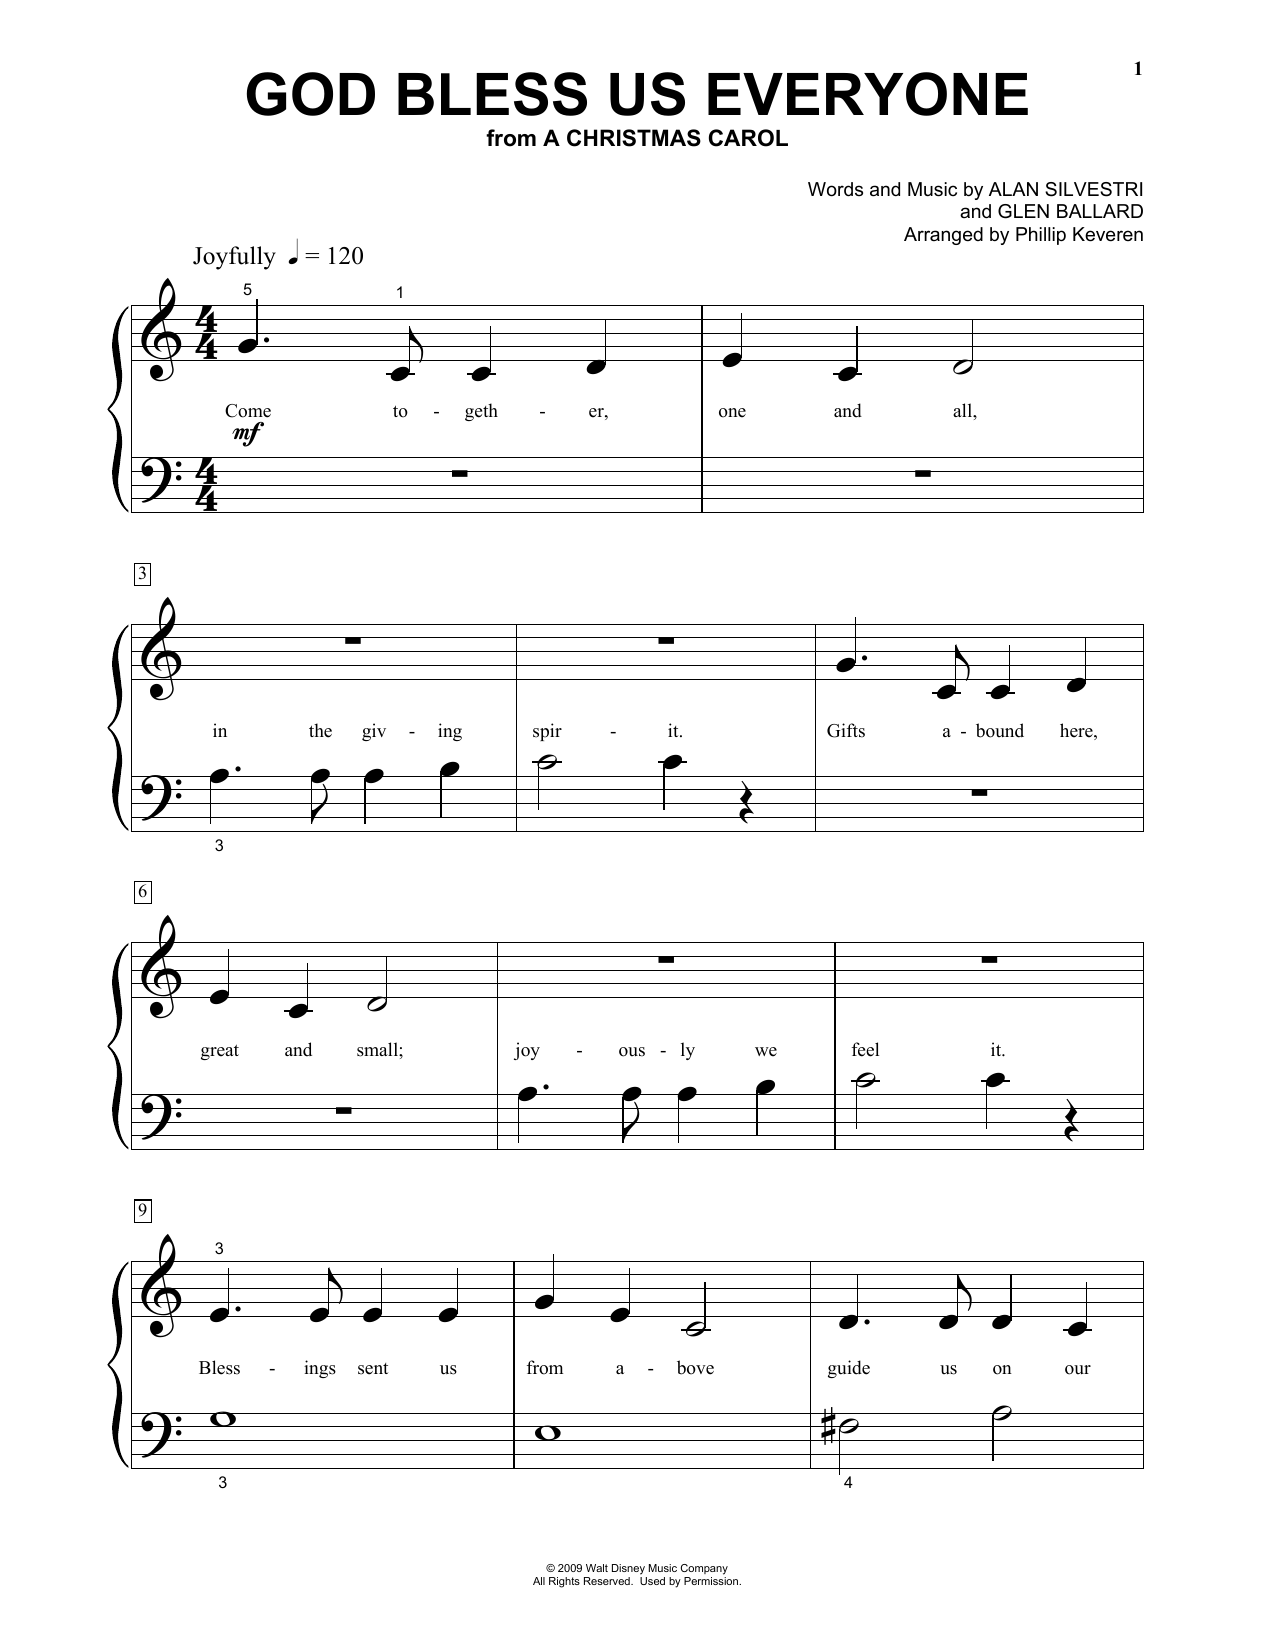 Download Andrea Bocelli God Bless Us Everyone (from Disney's A Sheet Music